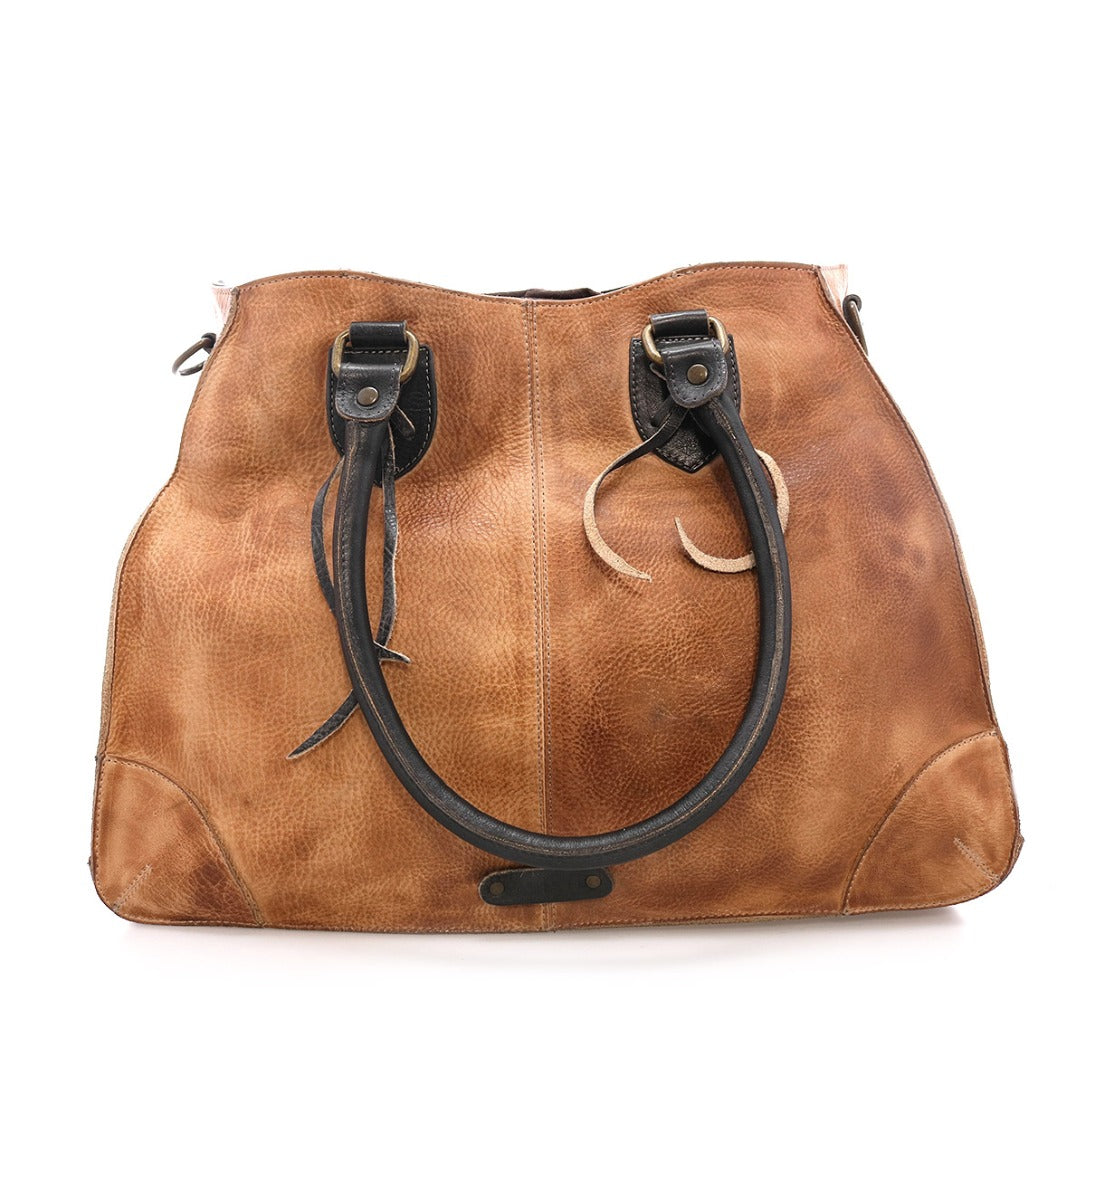 A brown leather handbag with black handles, the Bruna by Bed Stu.